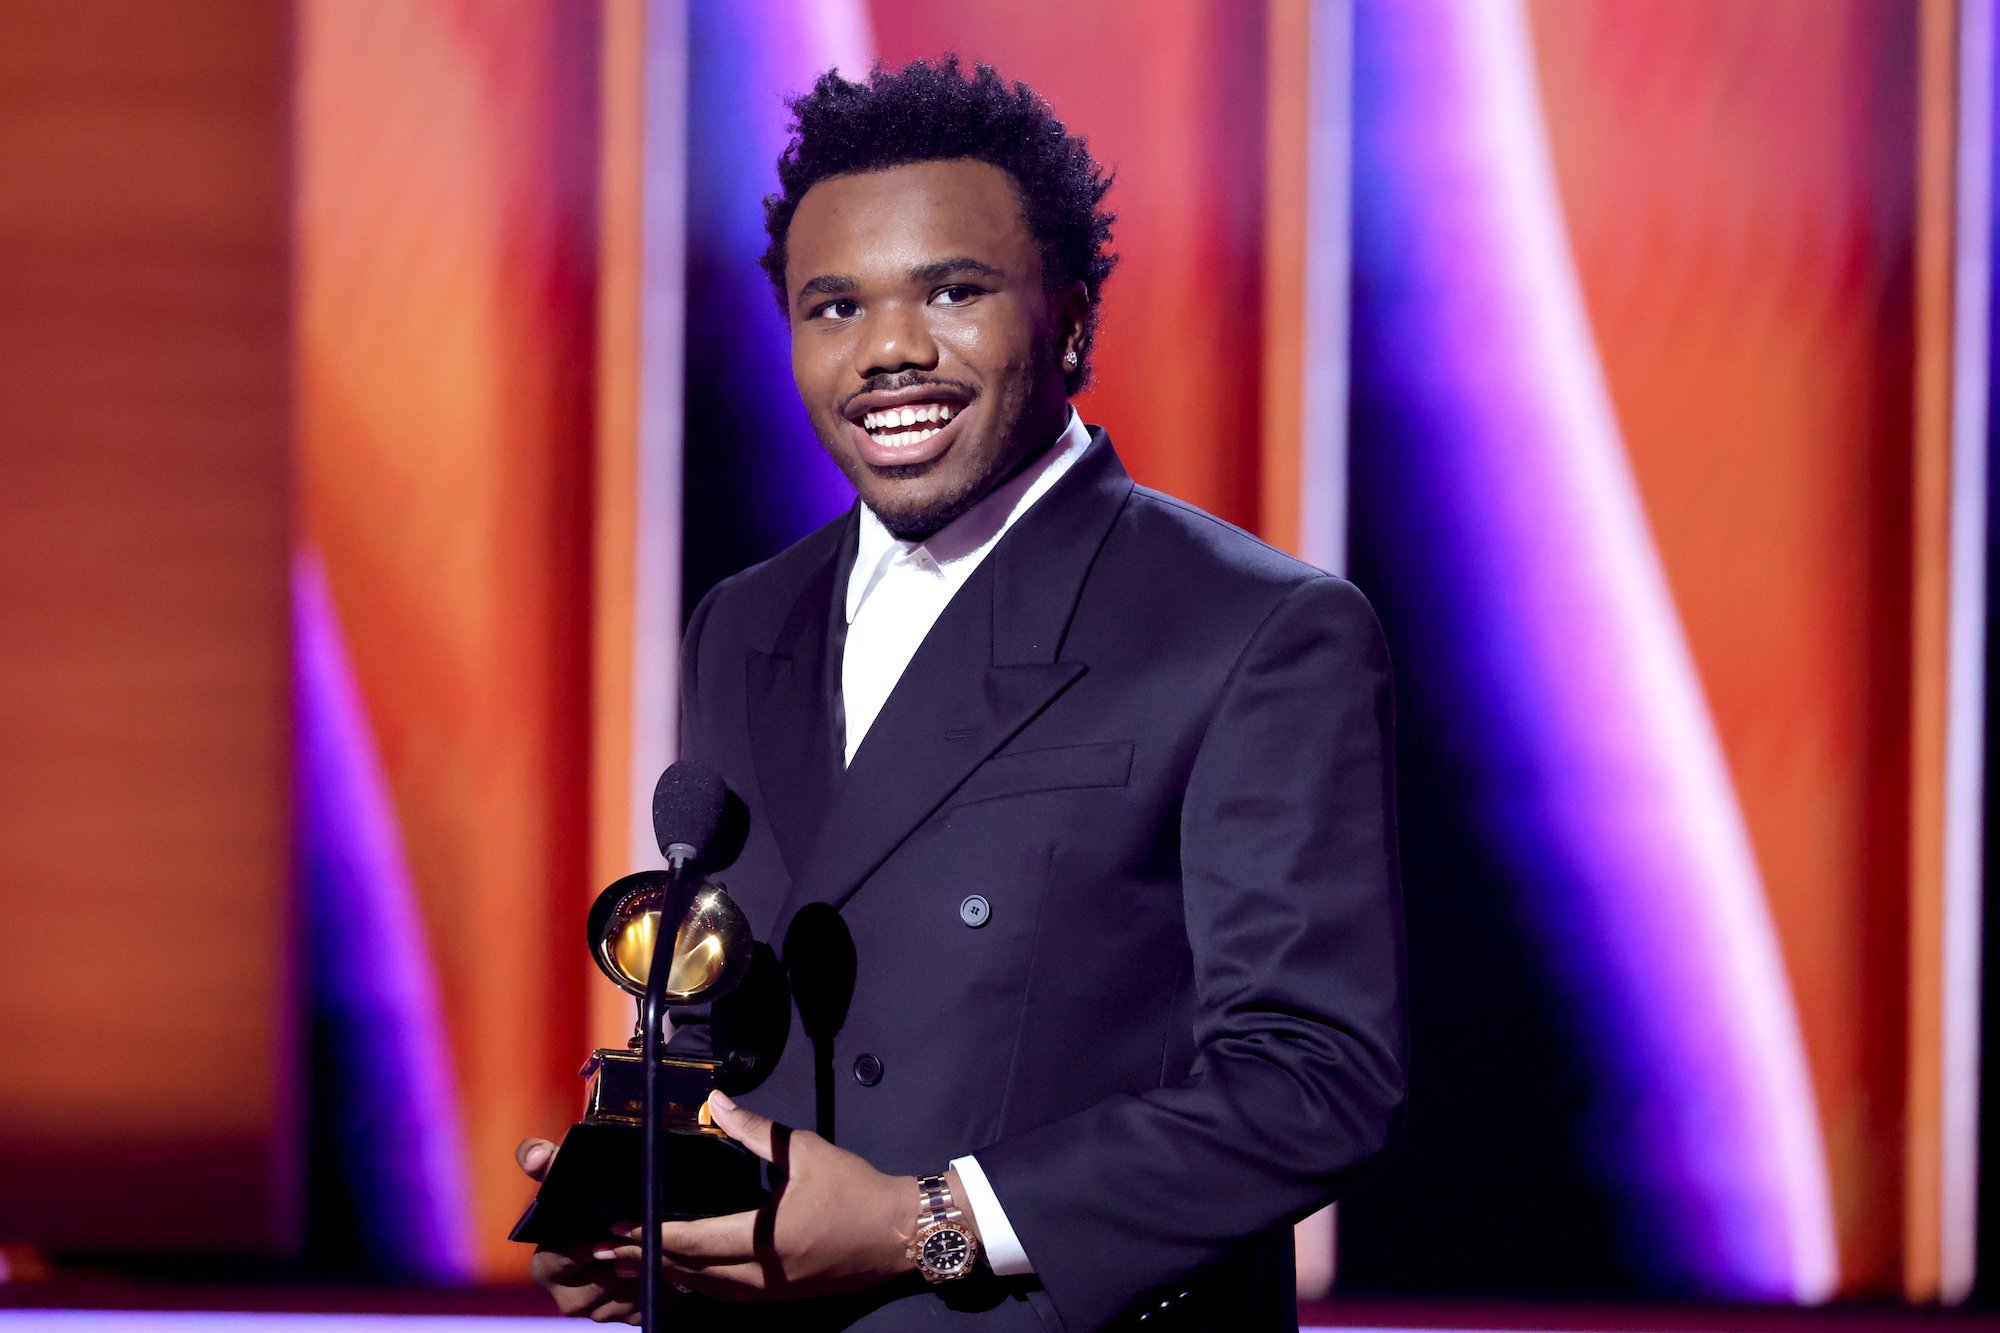 Baby Keem, cousin of Kendrick Lamar, wearing a suit and holding a Grammy Award